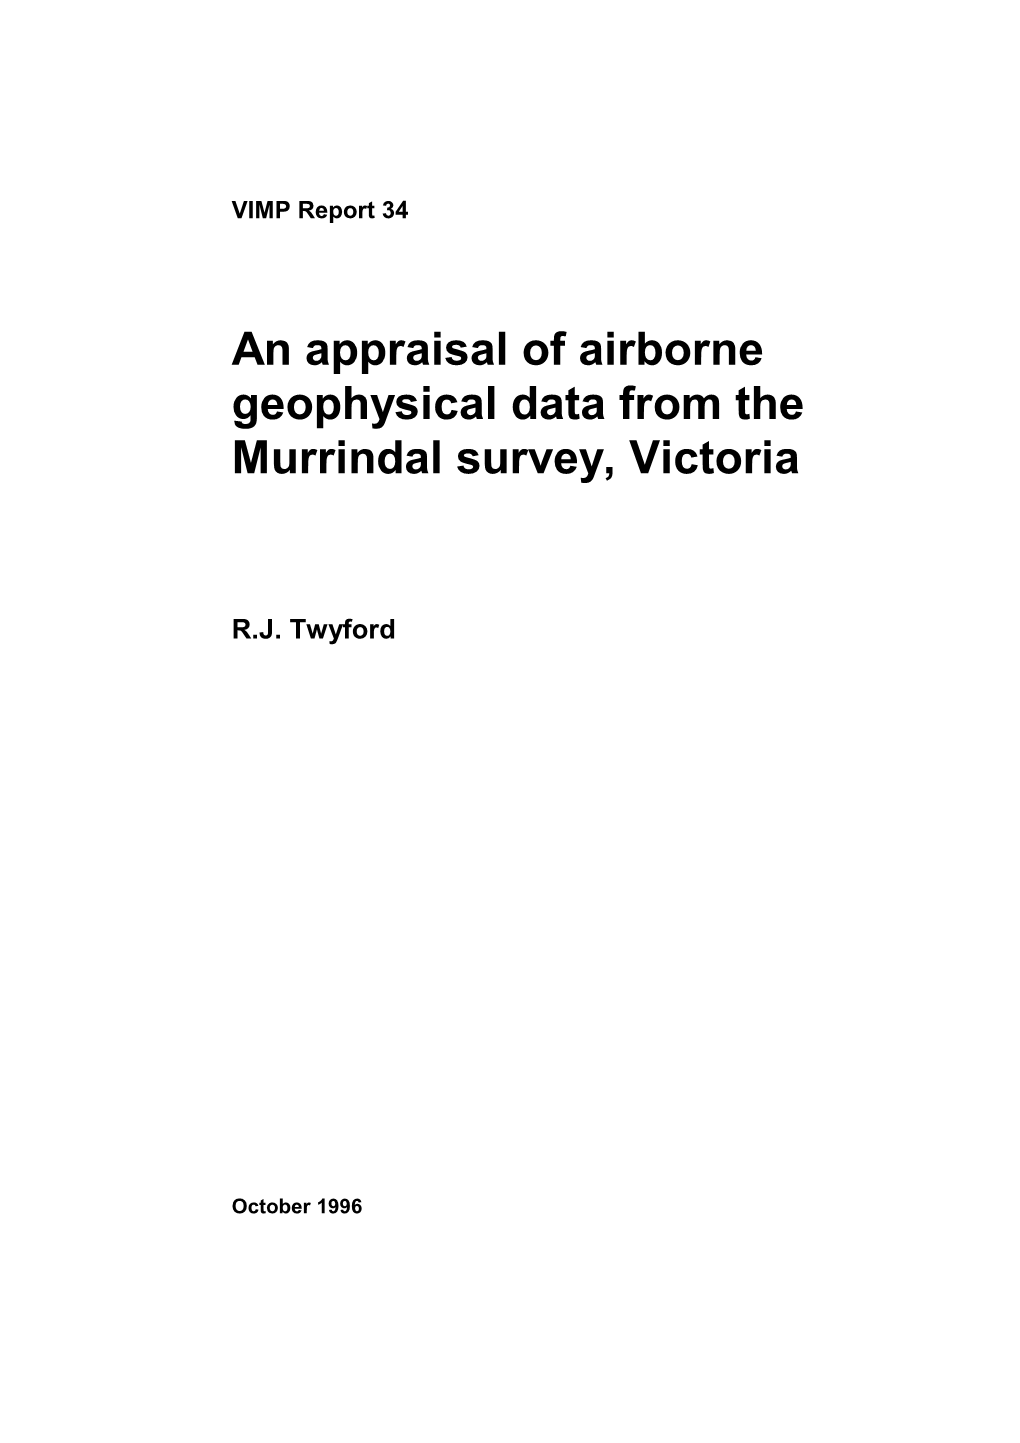 An Appraisal of Airborne Geophysical Data from the Murrindal Survey, Victoria